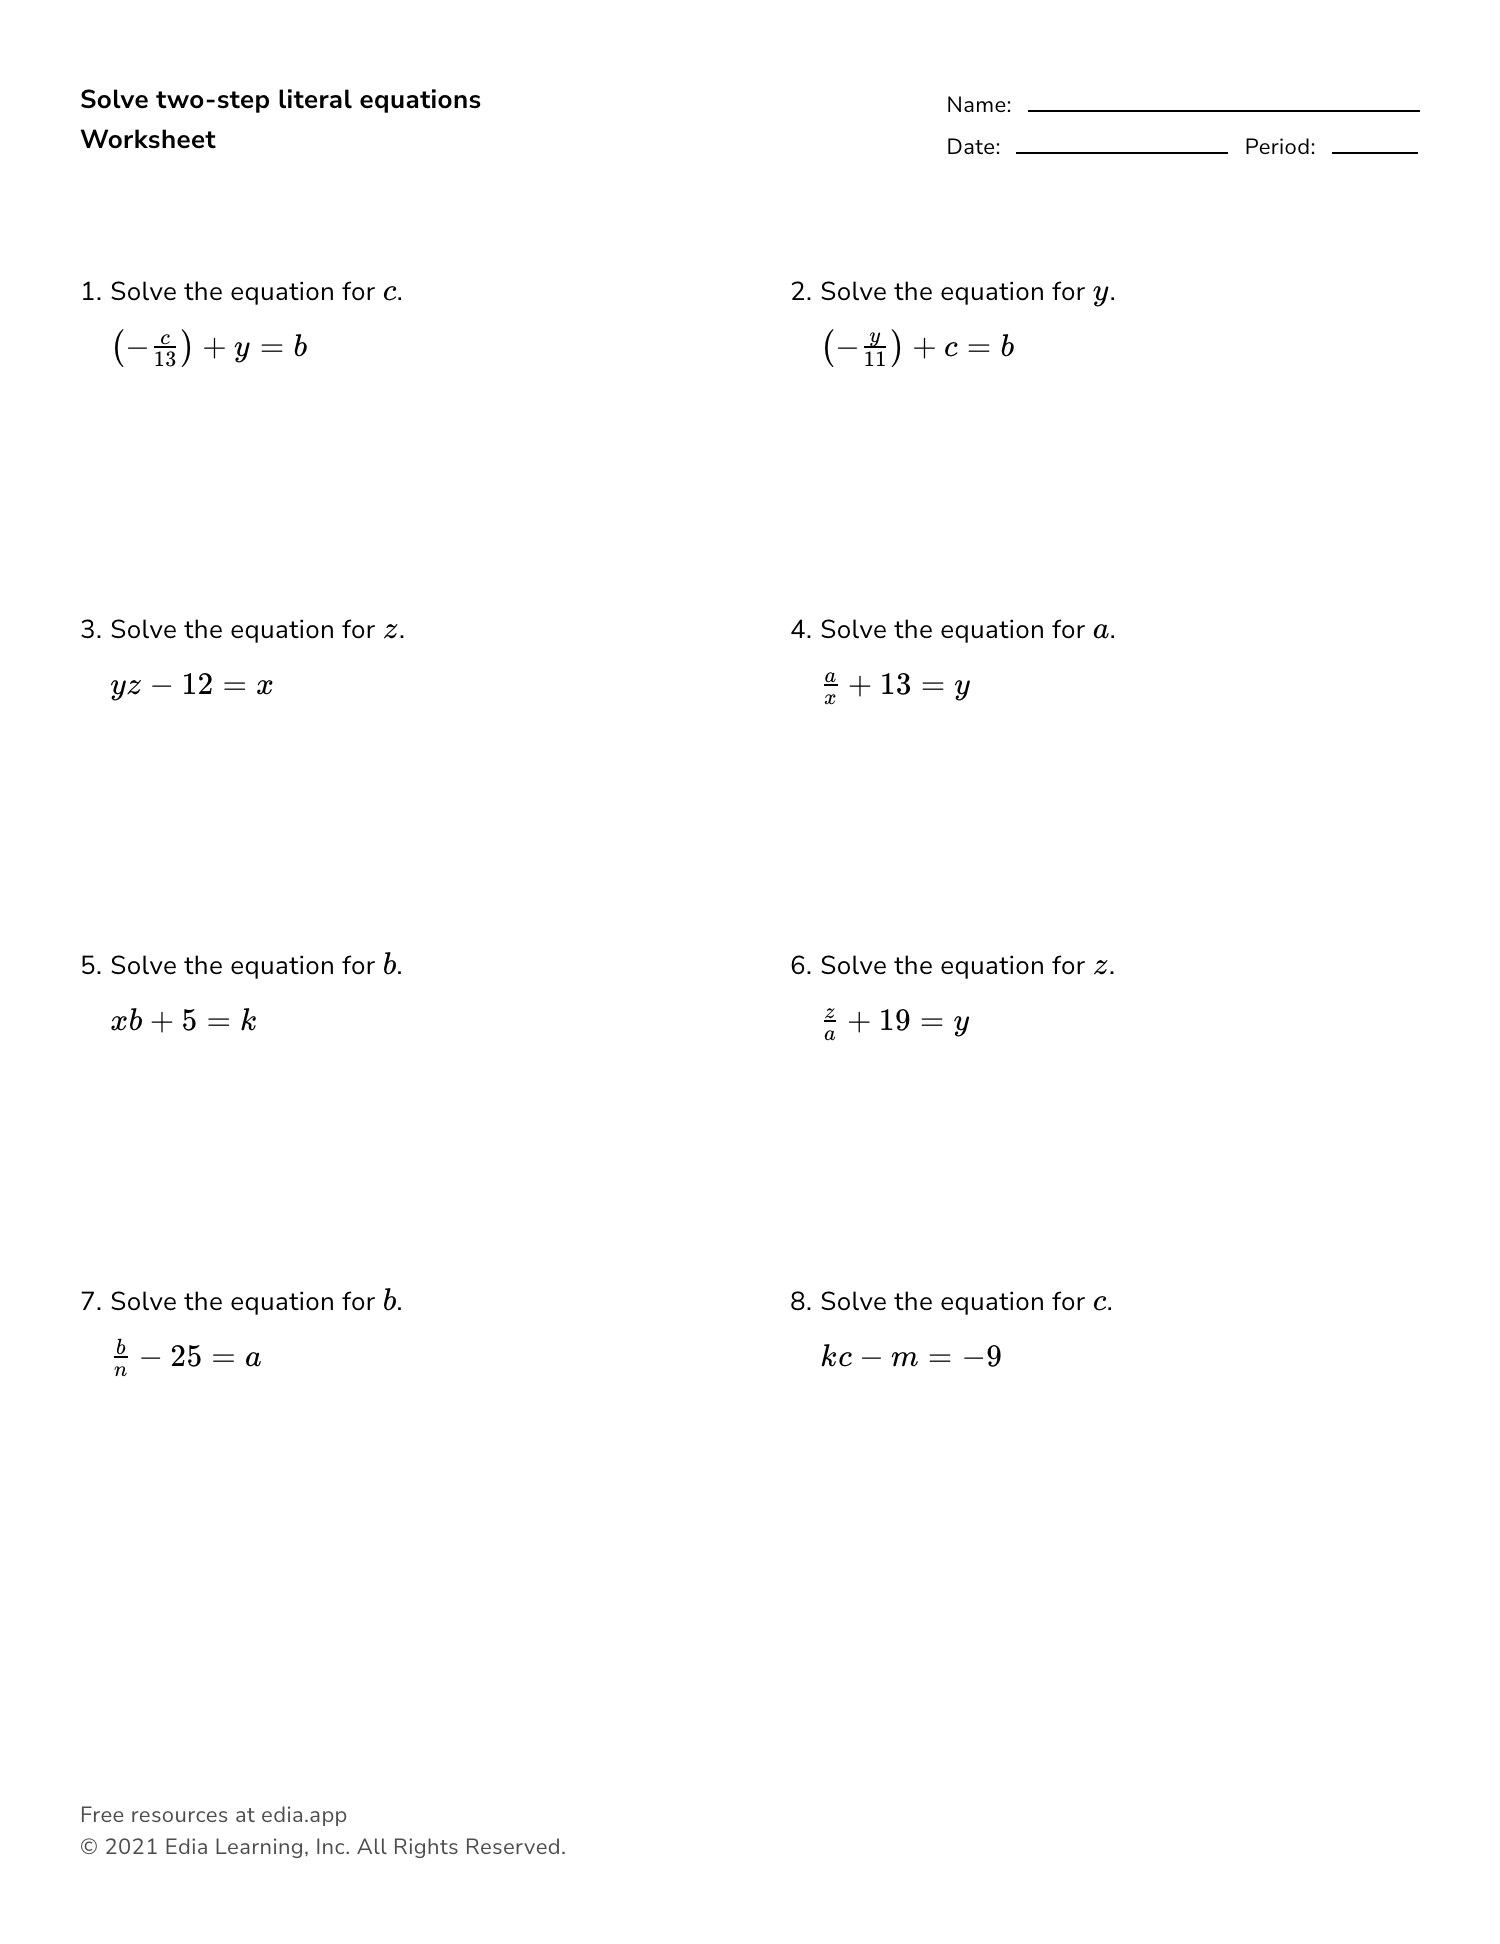 Solve Two-step Literal Equations - Worksheet In Literal Equations Worksheet Answers